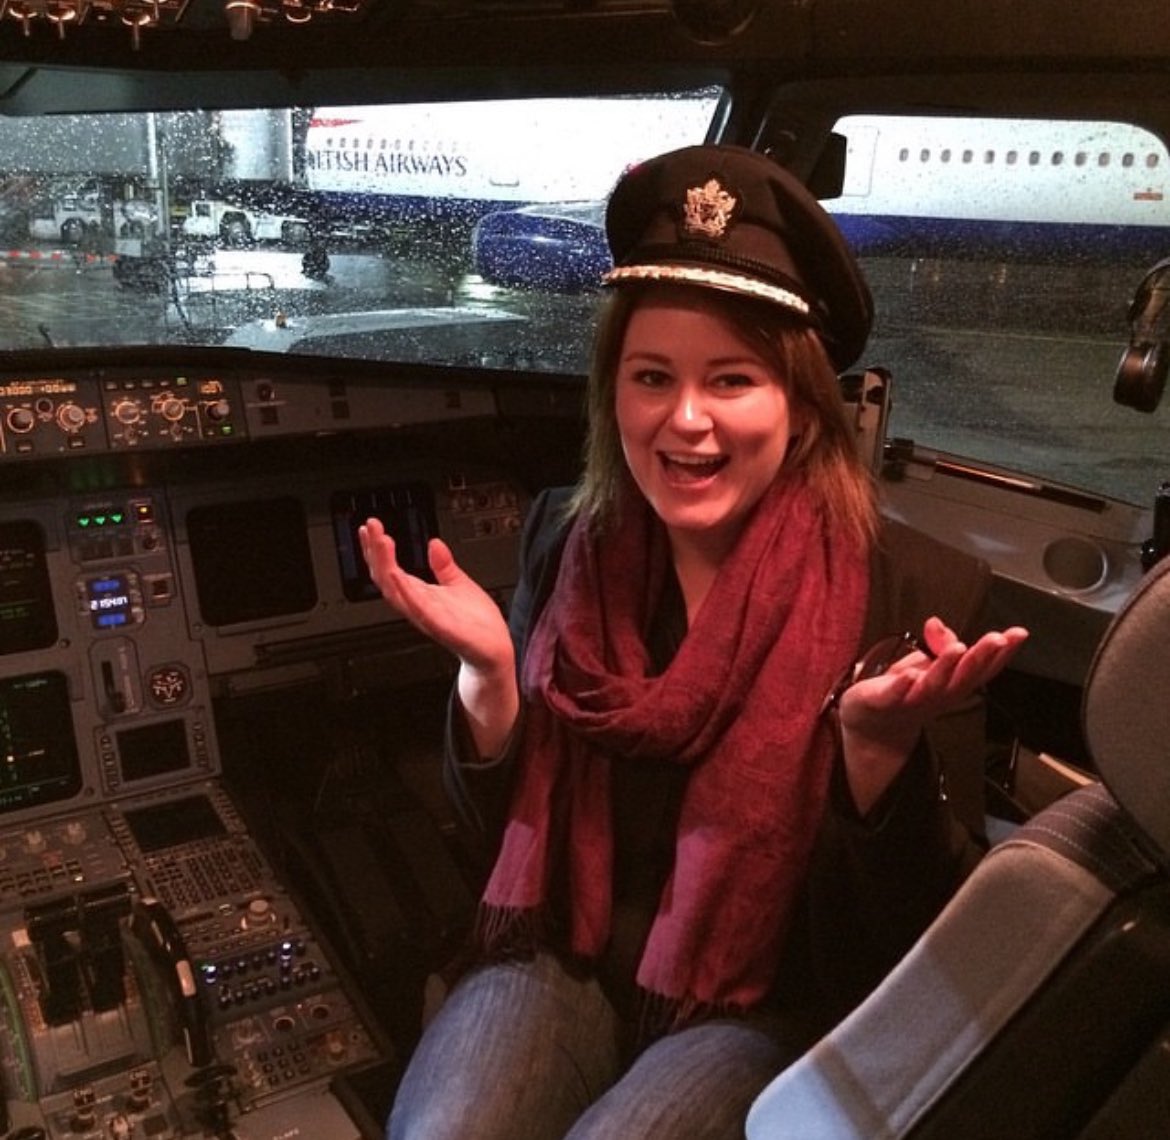 I suit being a captain. My newly landed A321 in Heathrow. No biggie. Do this every day.